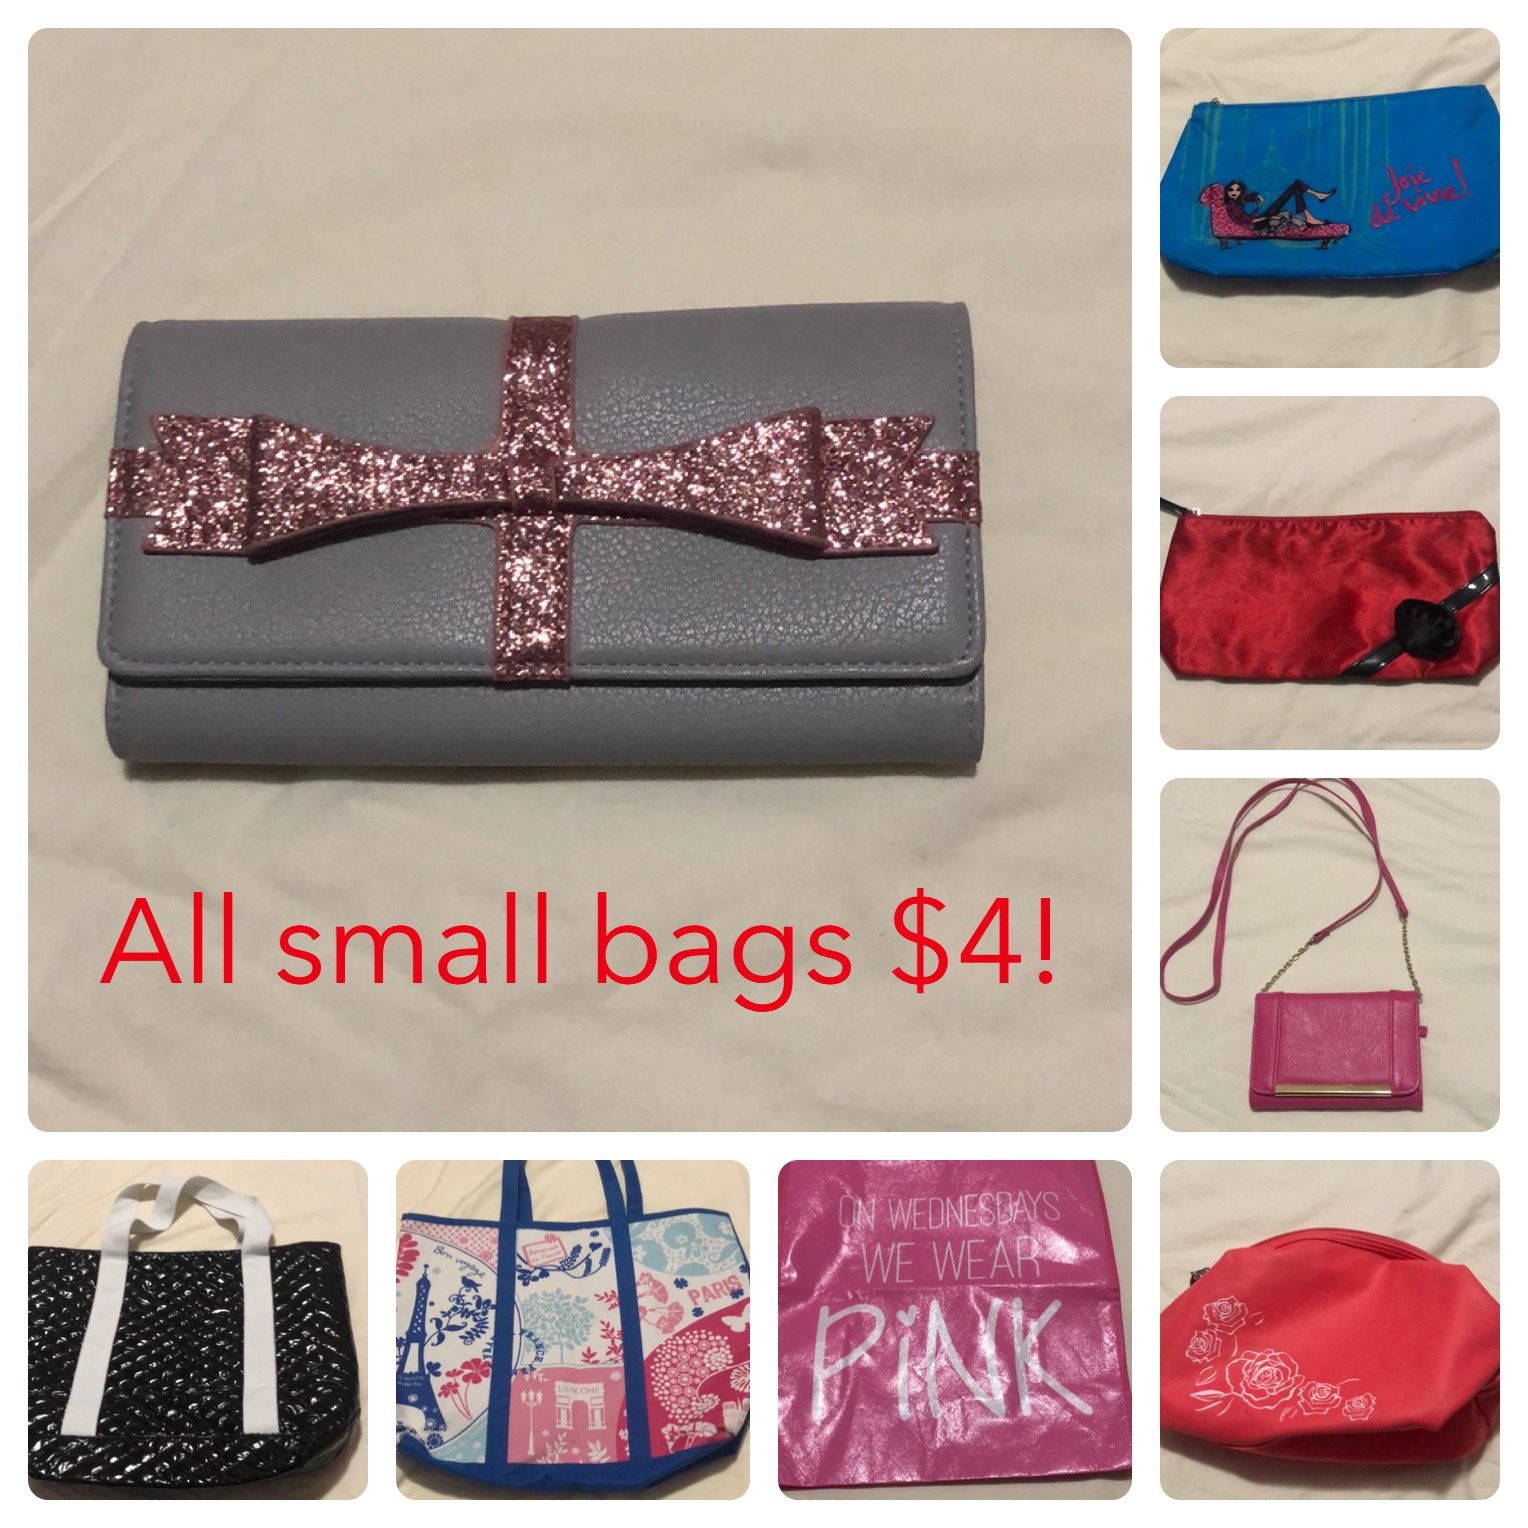 All small bags $4 each!!!